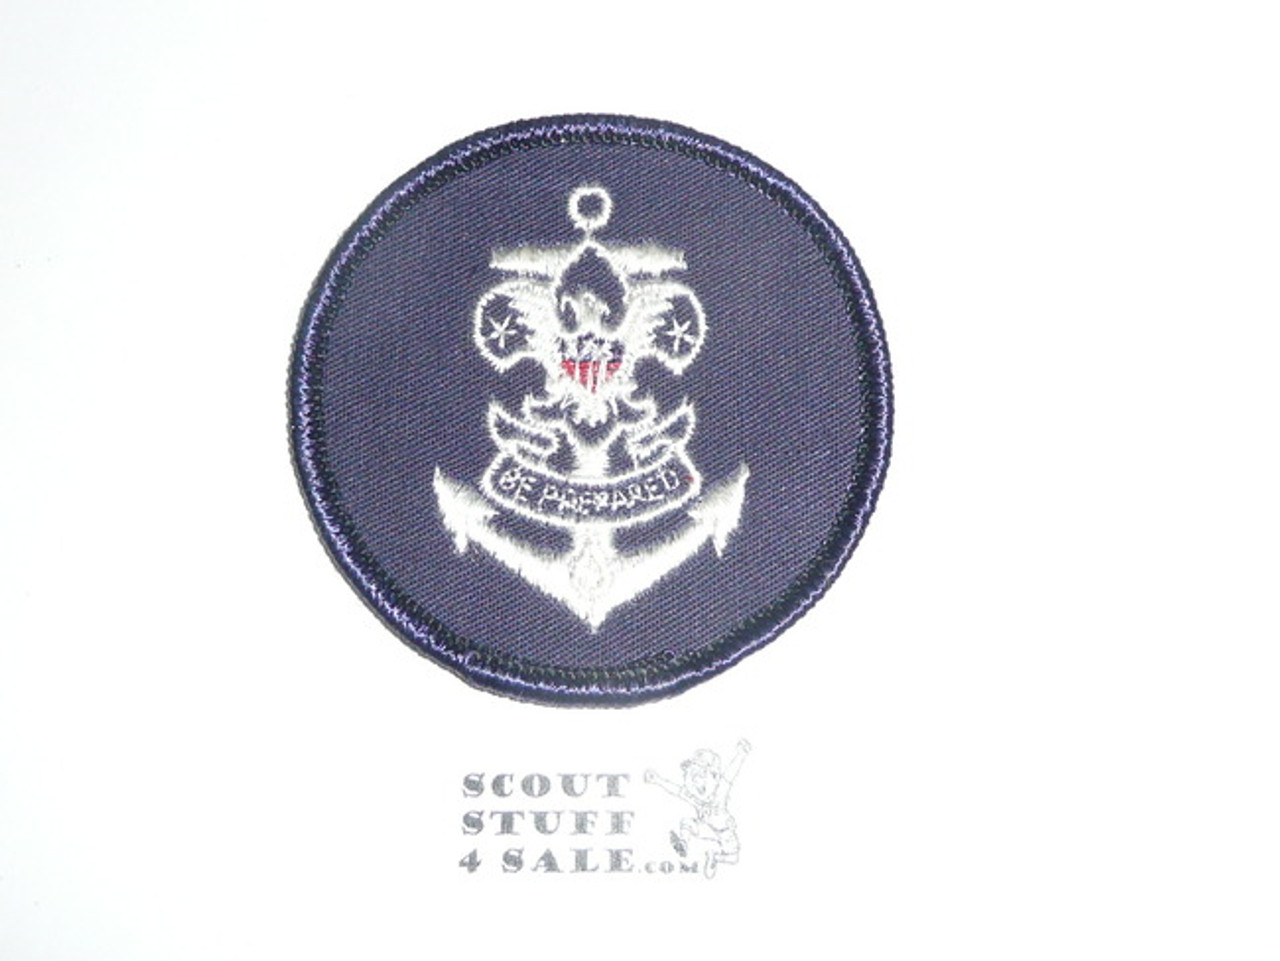 Sea Scout Universal Emblem Patch on Blue Twill, 1980's